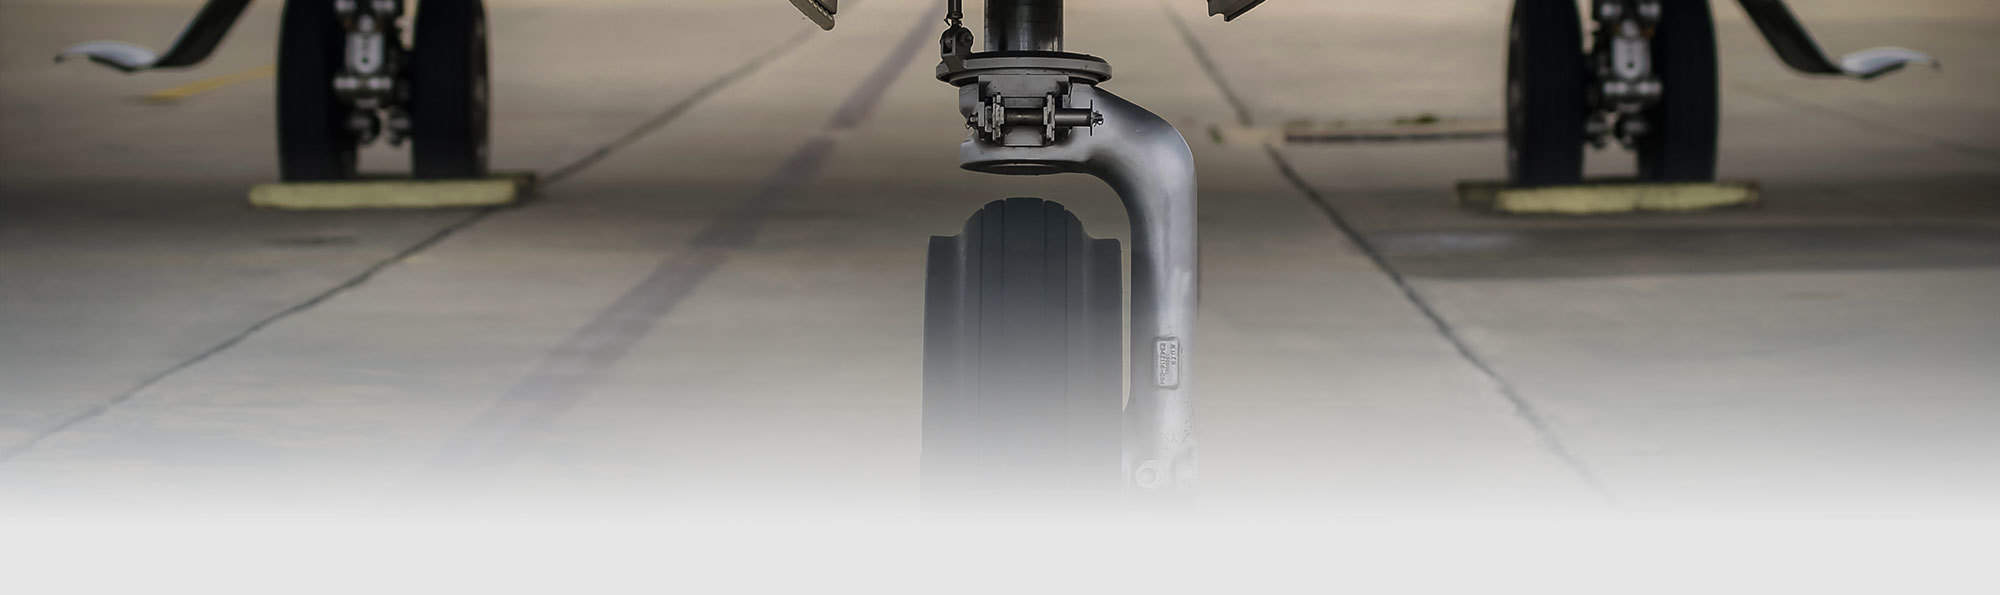 Corporate jet landing gear with FAA-PMA approved brake parts